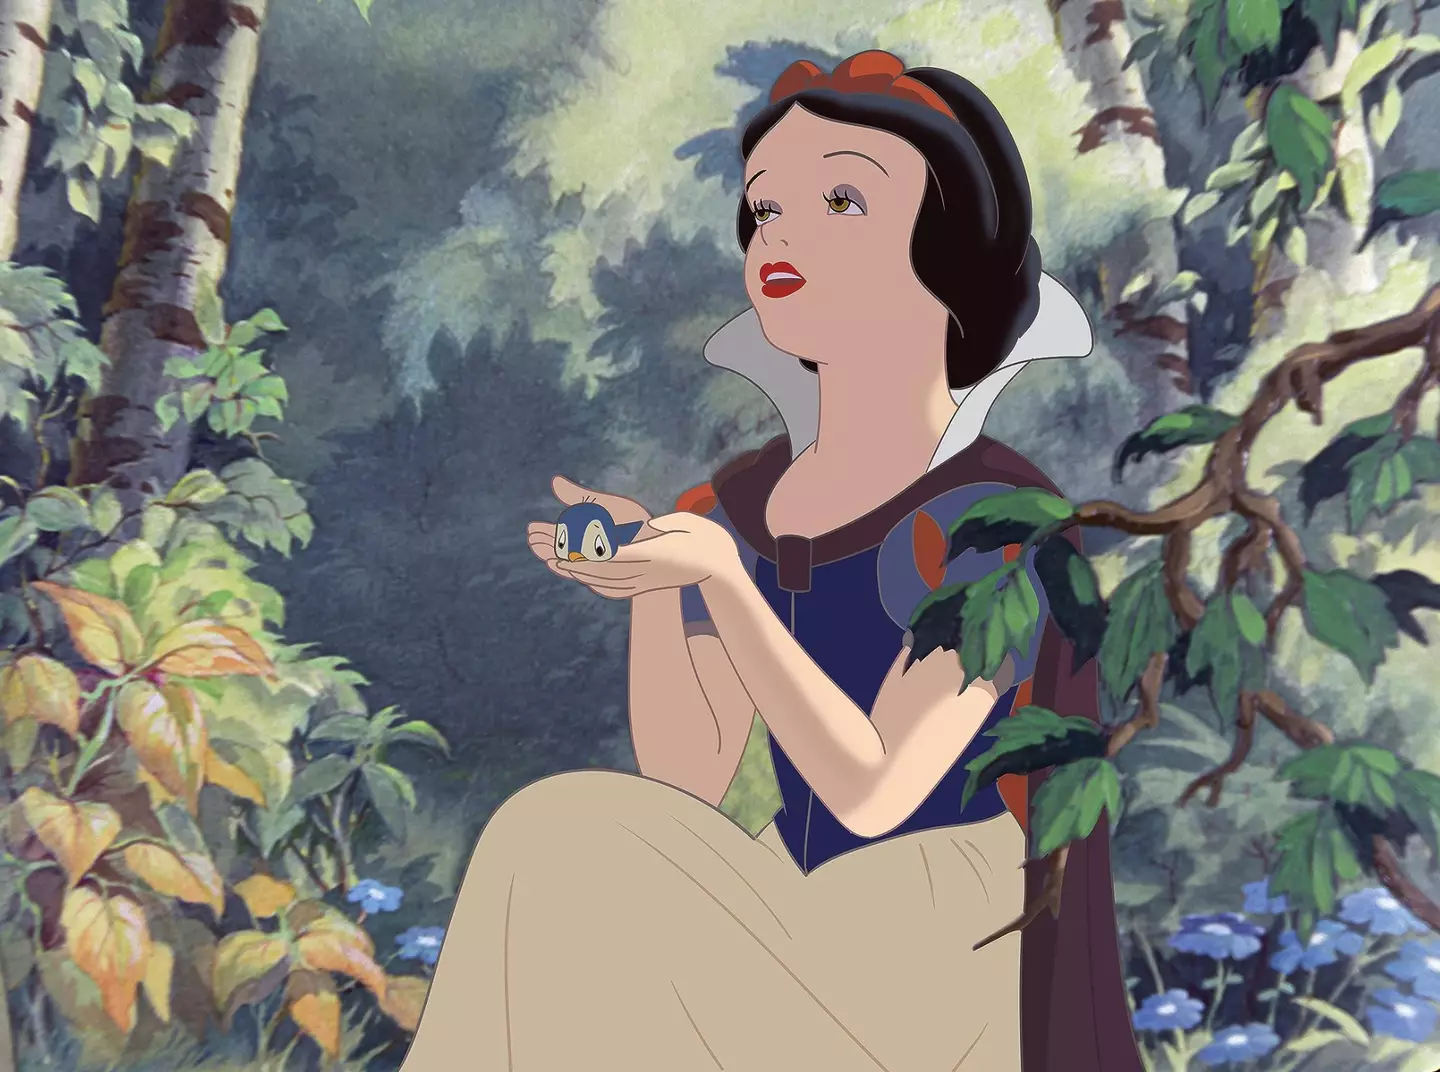 Snow White and the Seven Dwarves was first released in 1937.